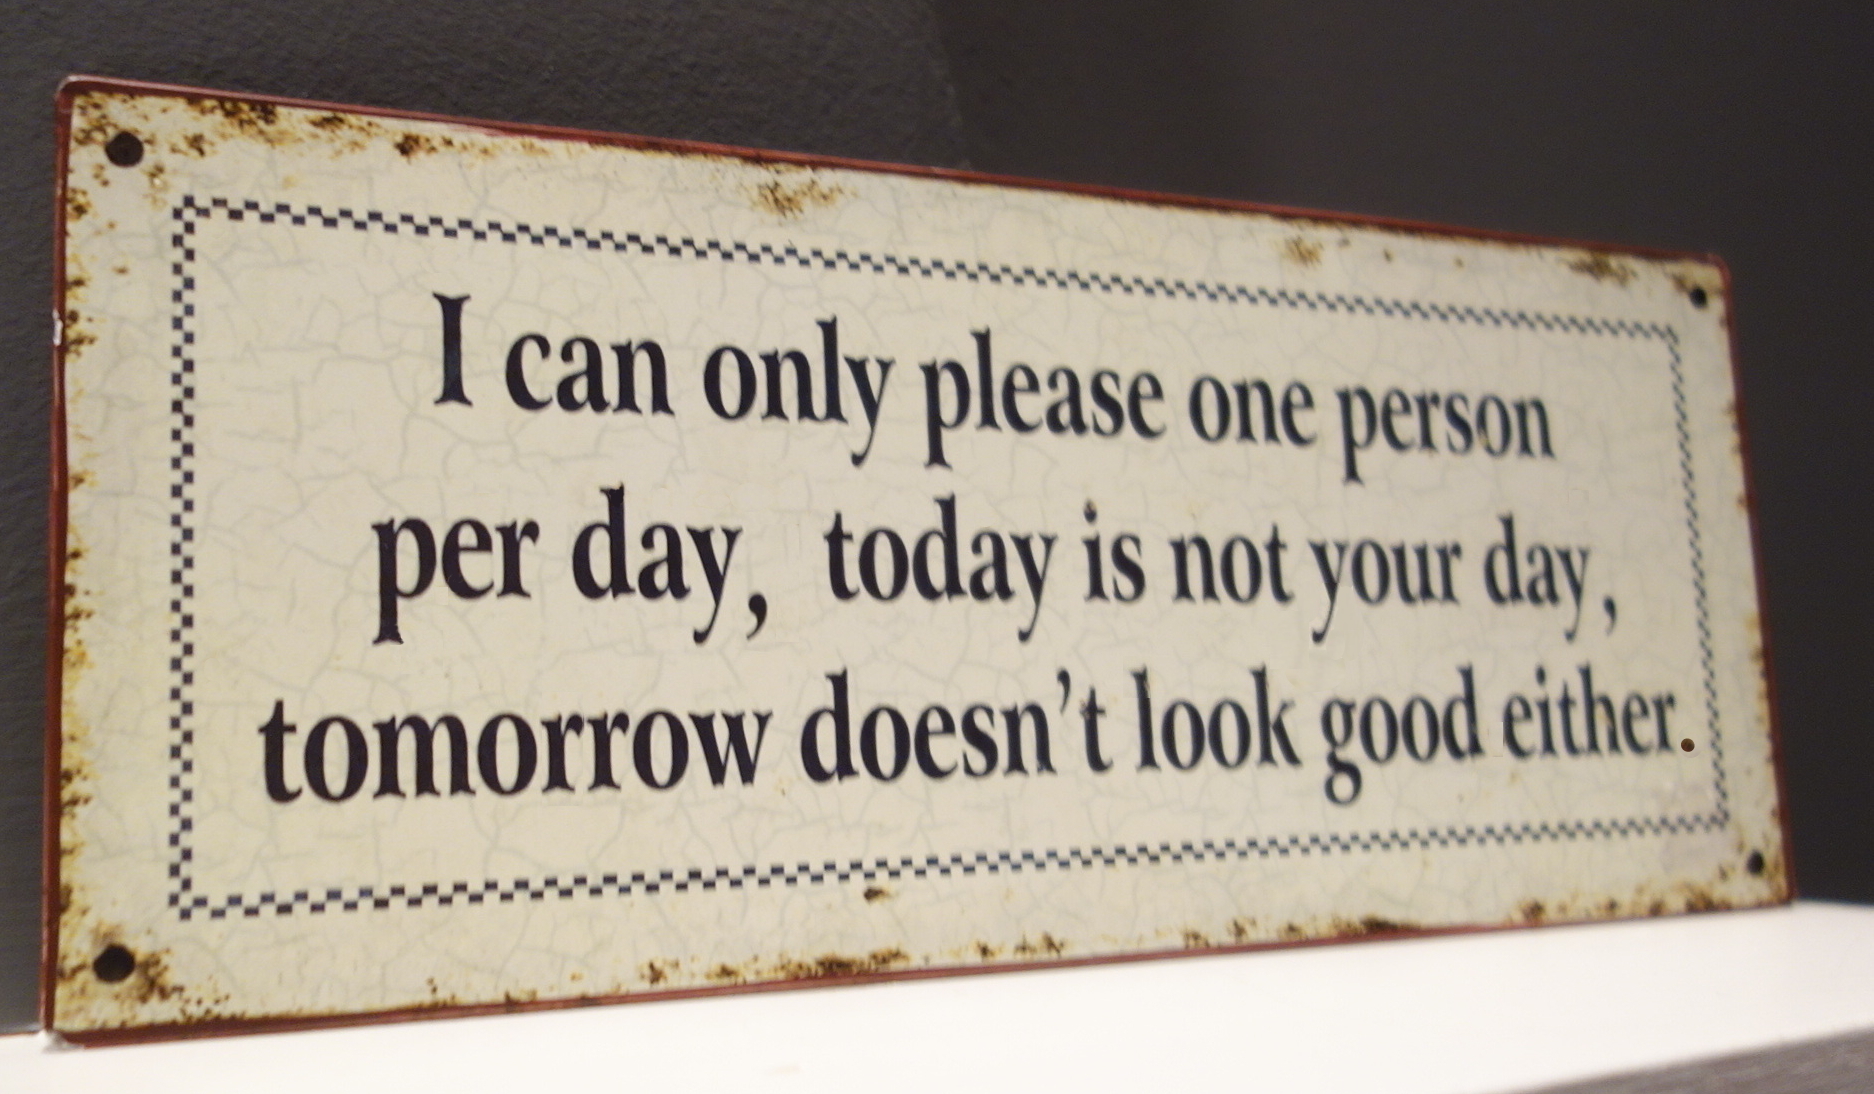 I can only please one person per day, today is not your day.